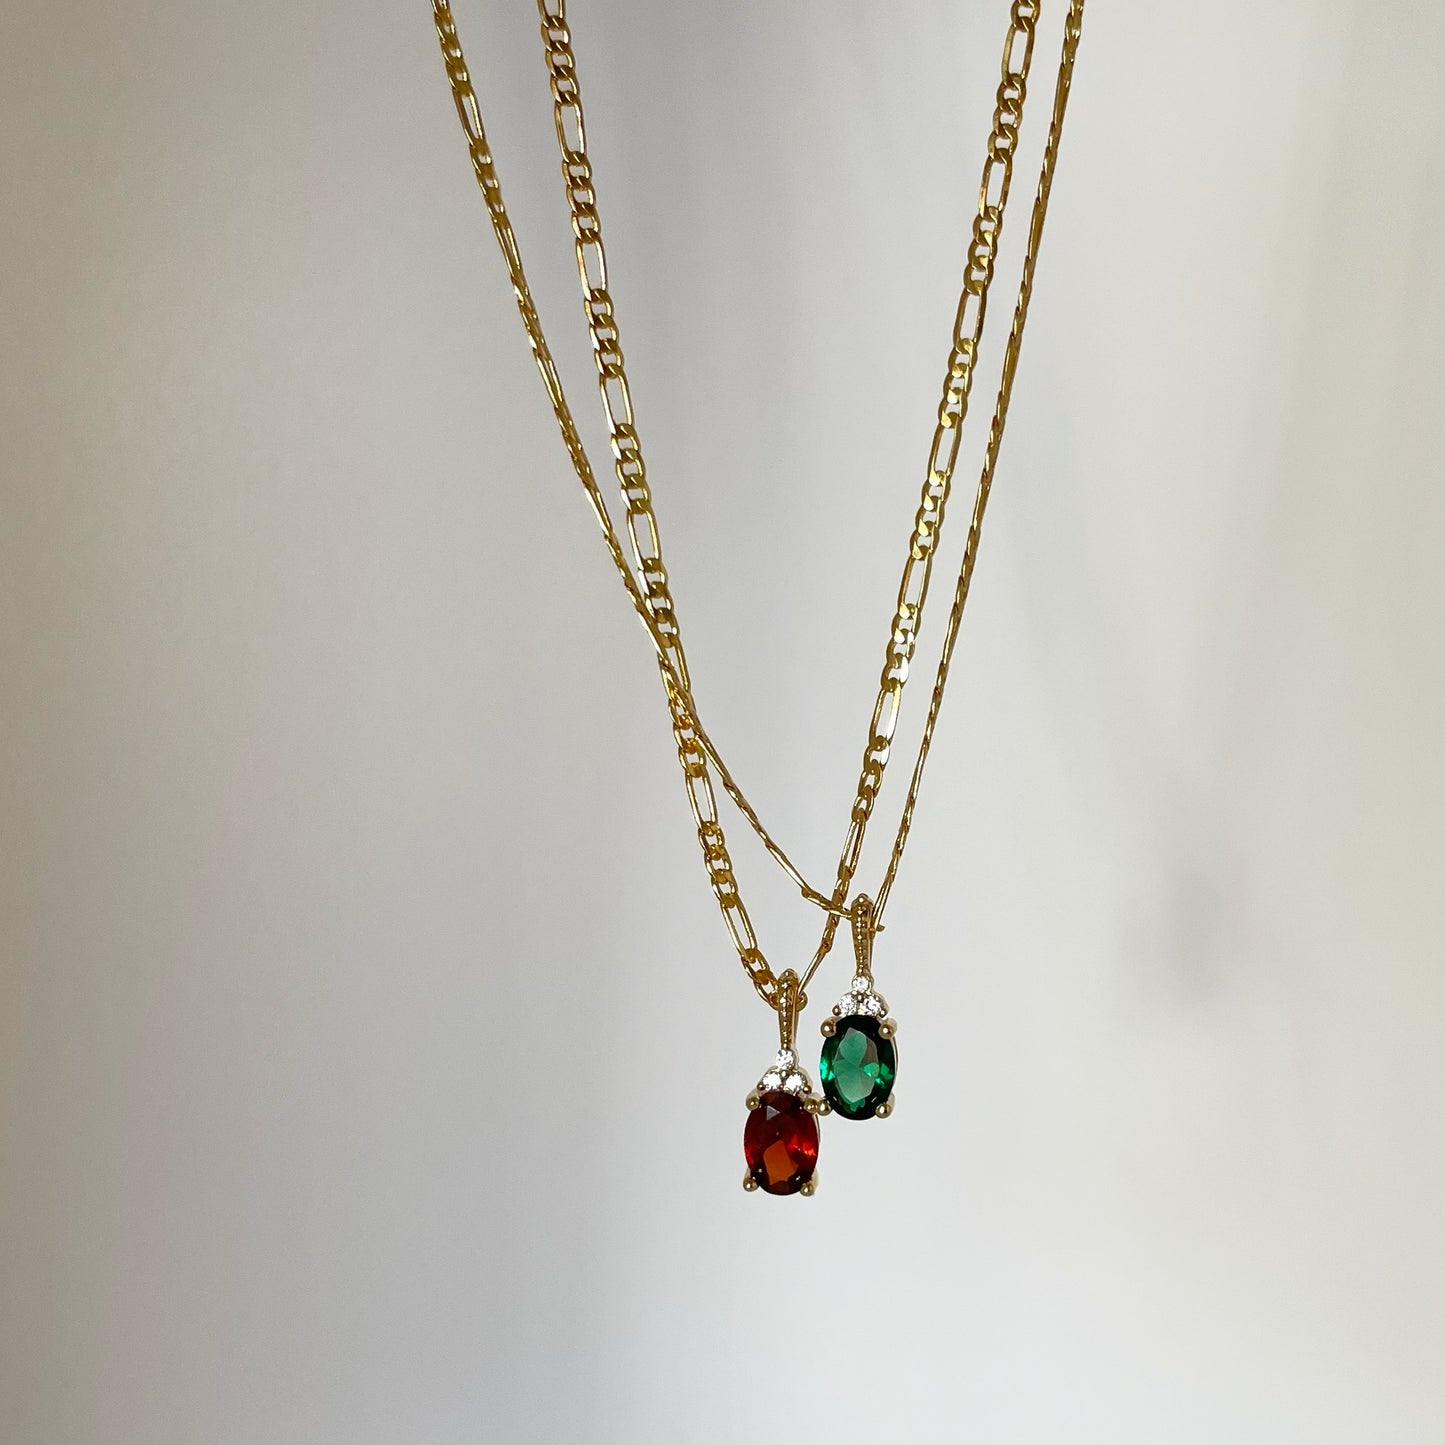 Ruby Baby Necklace